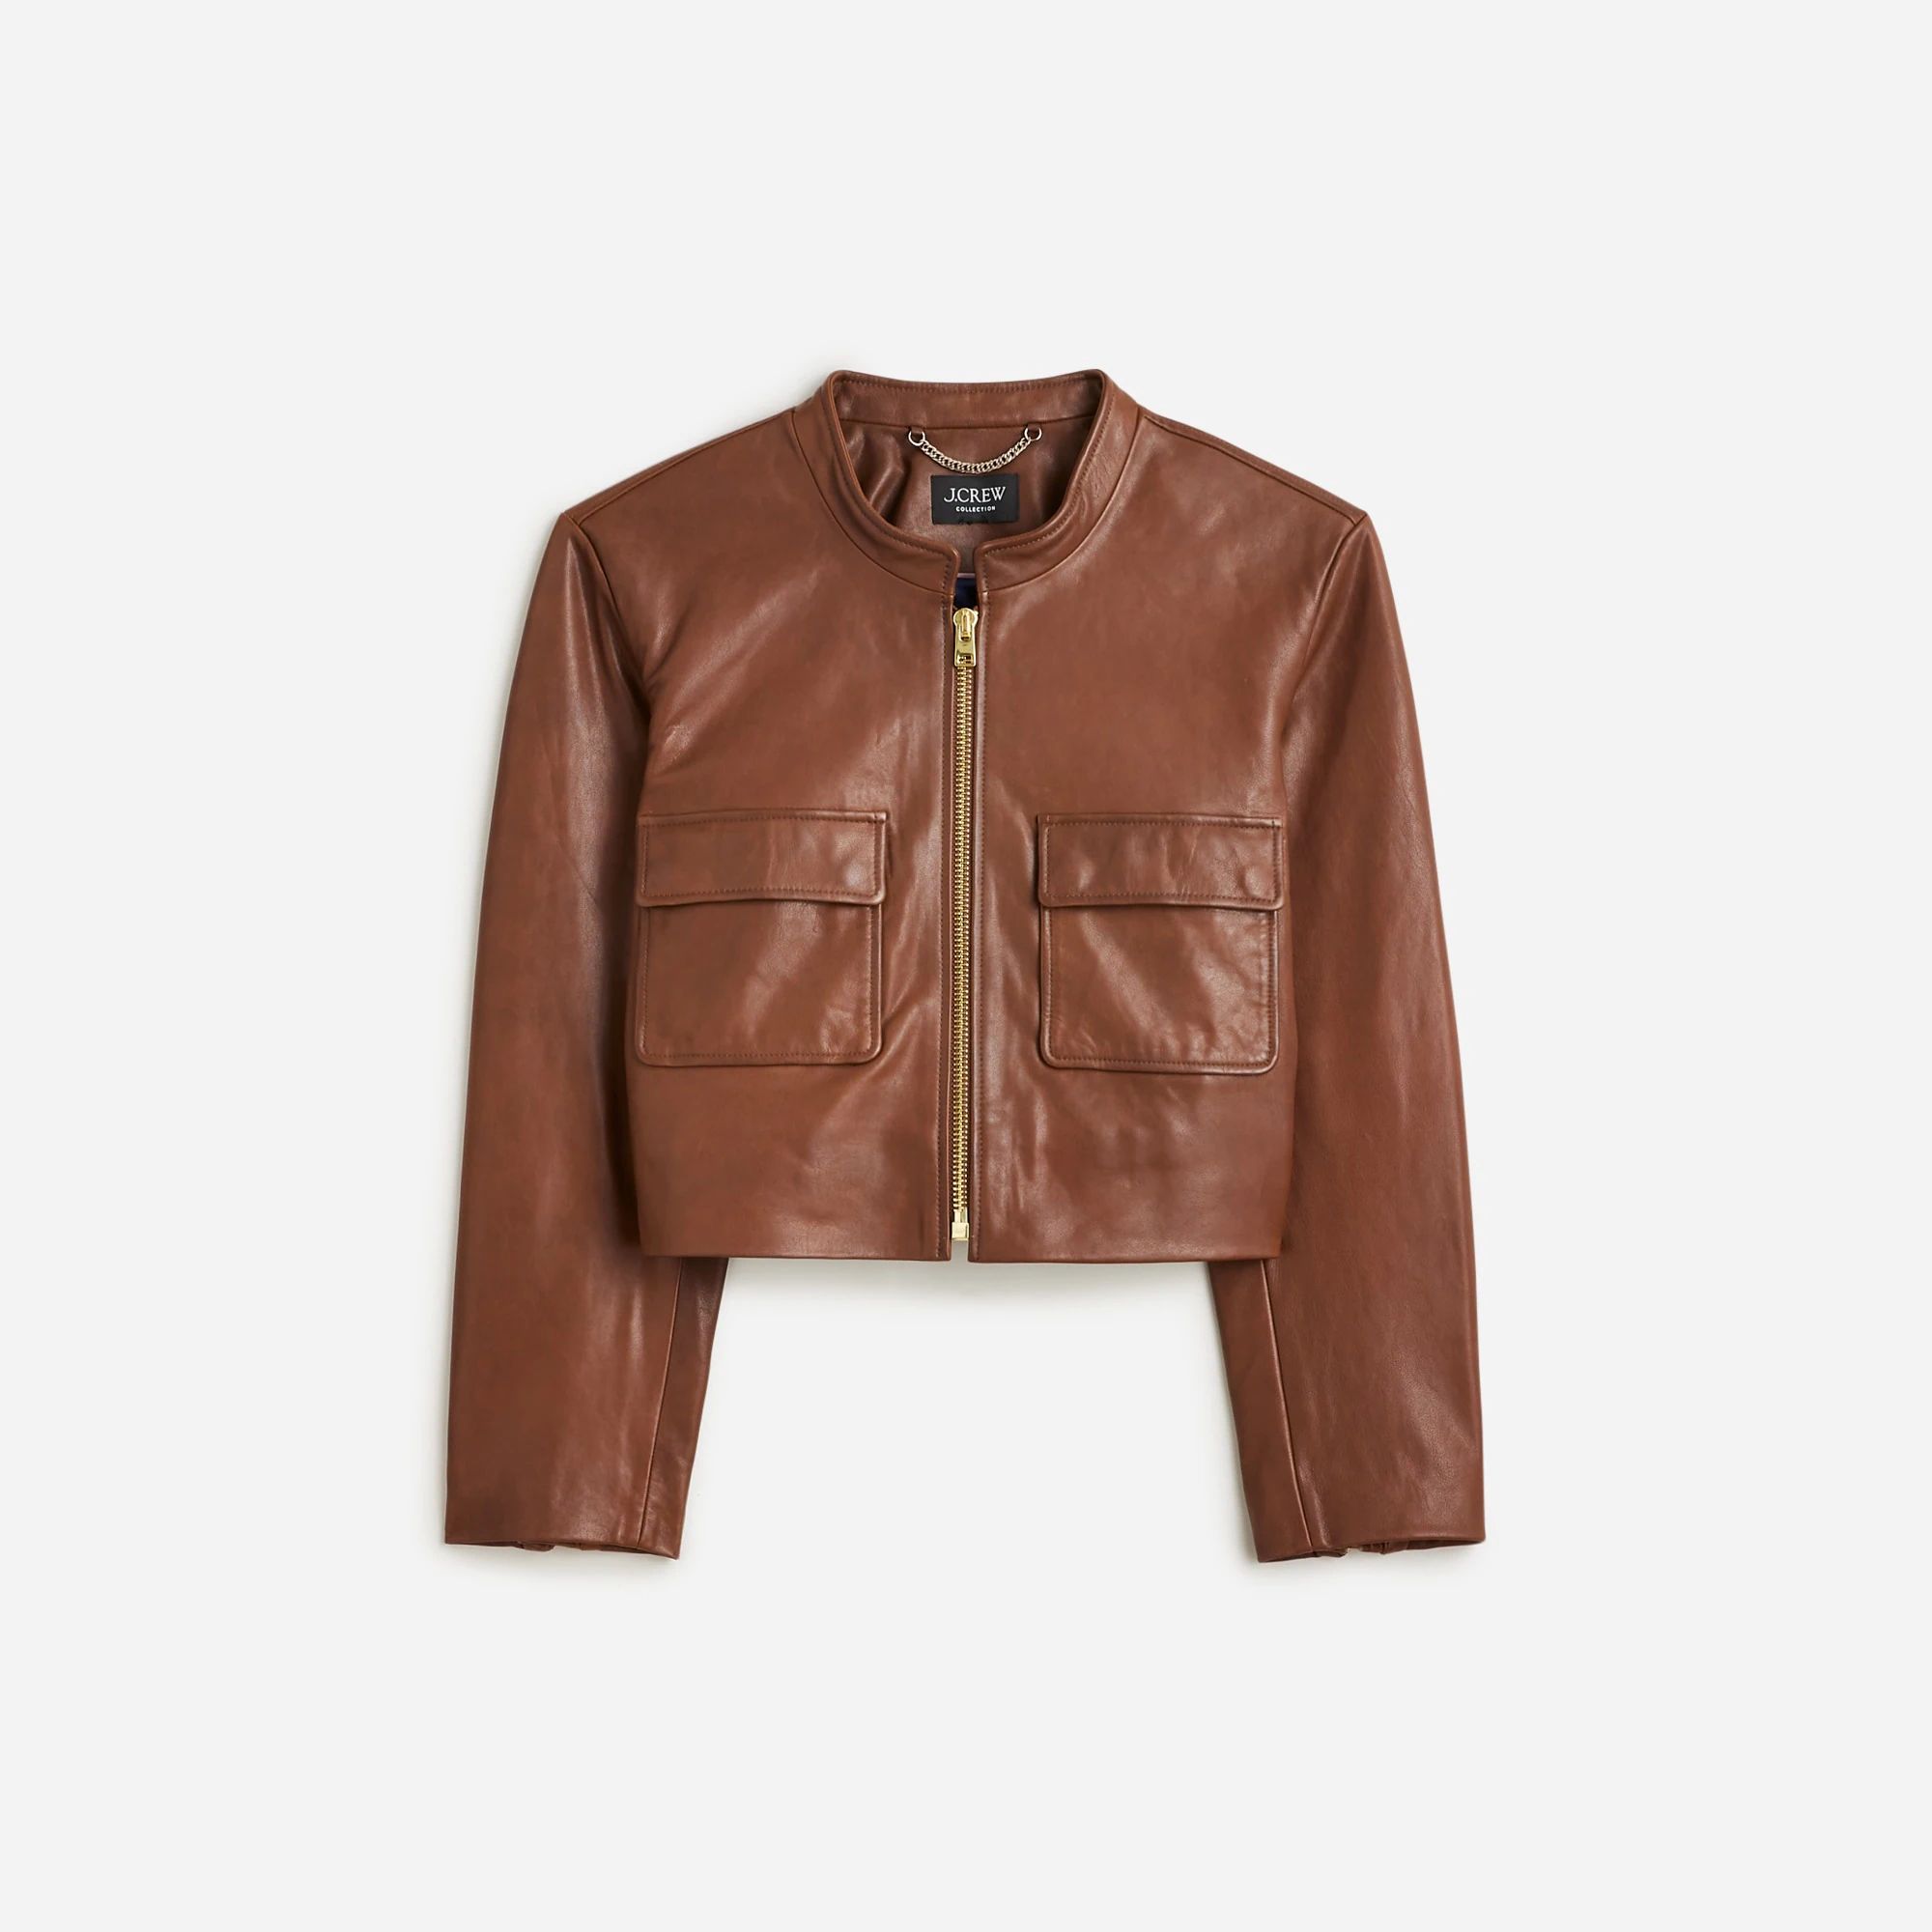 J.Crew: Collection Distressed Leather Jacket For Women | J.Crew US